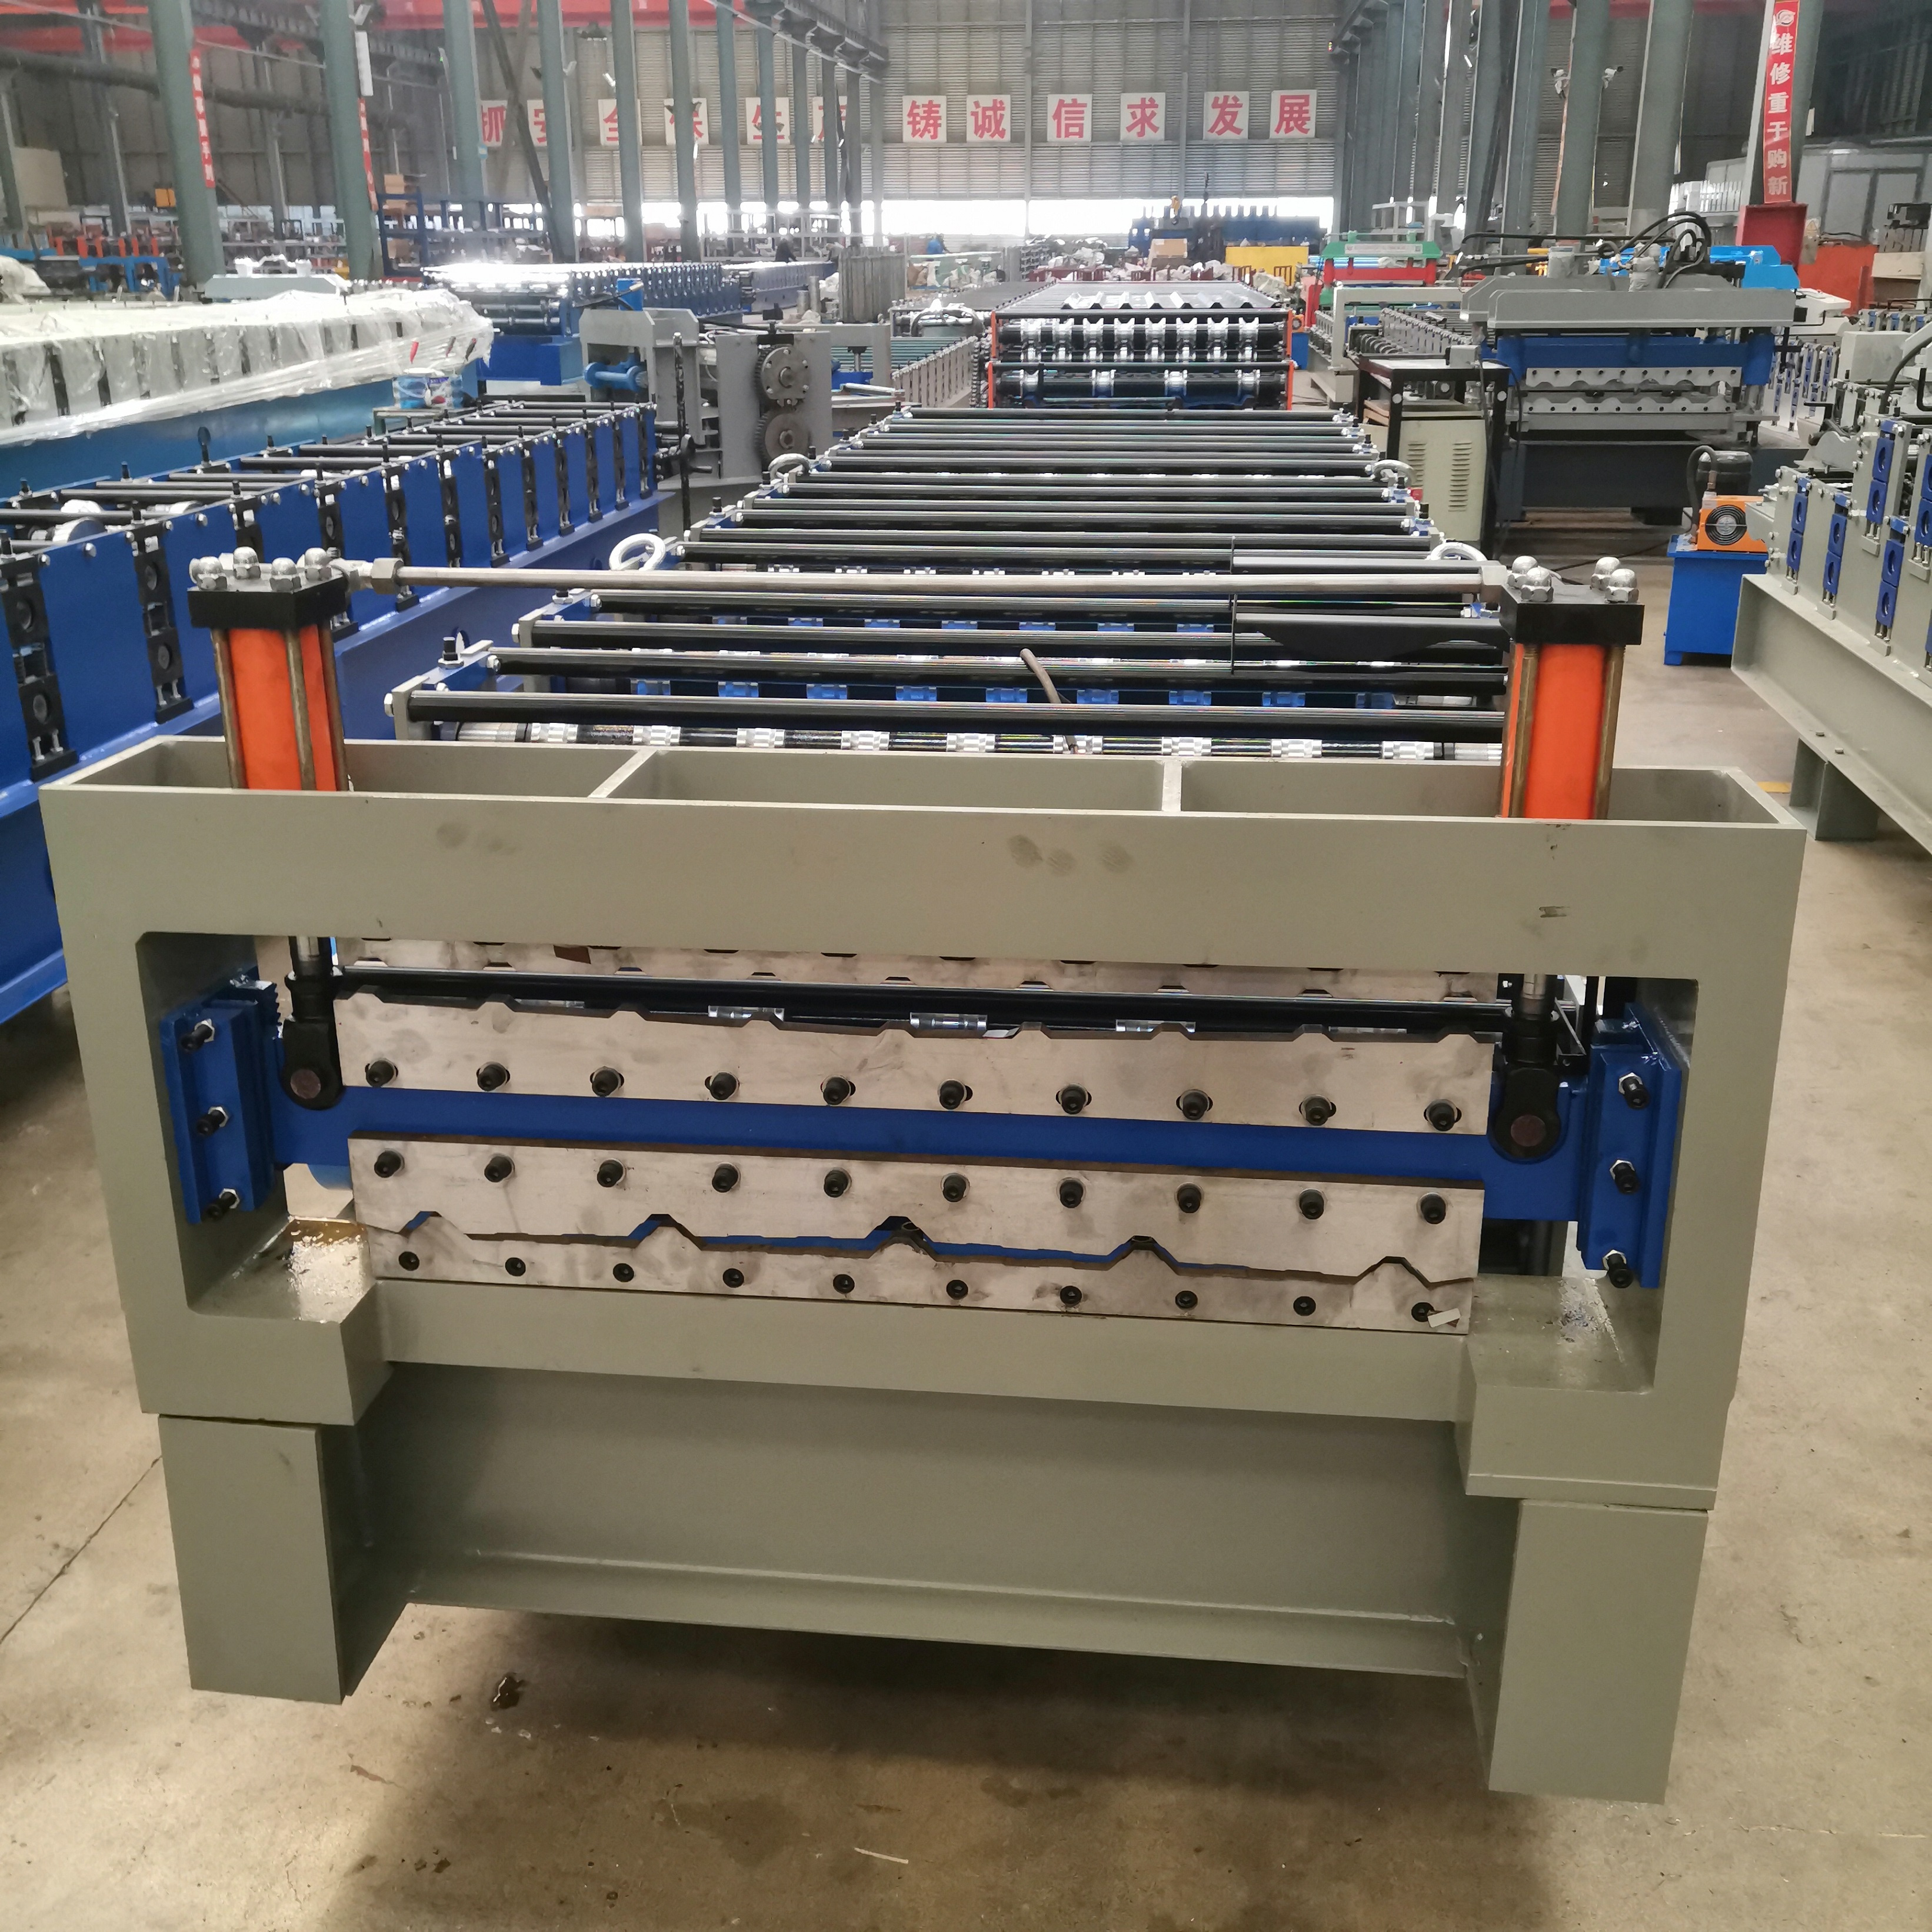 Why Purchasing a Roll Forming Line with Material Handling Increases Efficiency, Safety | ACHR News